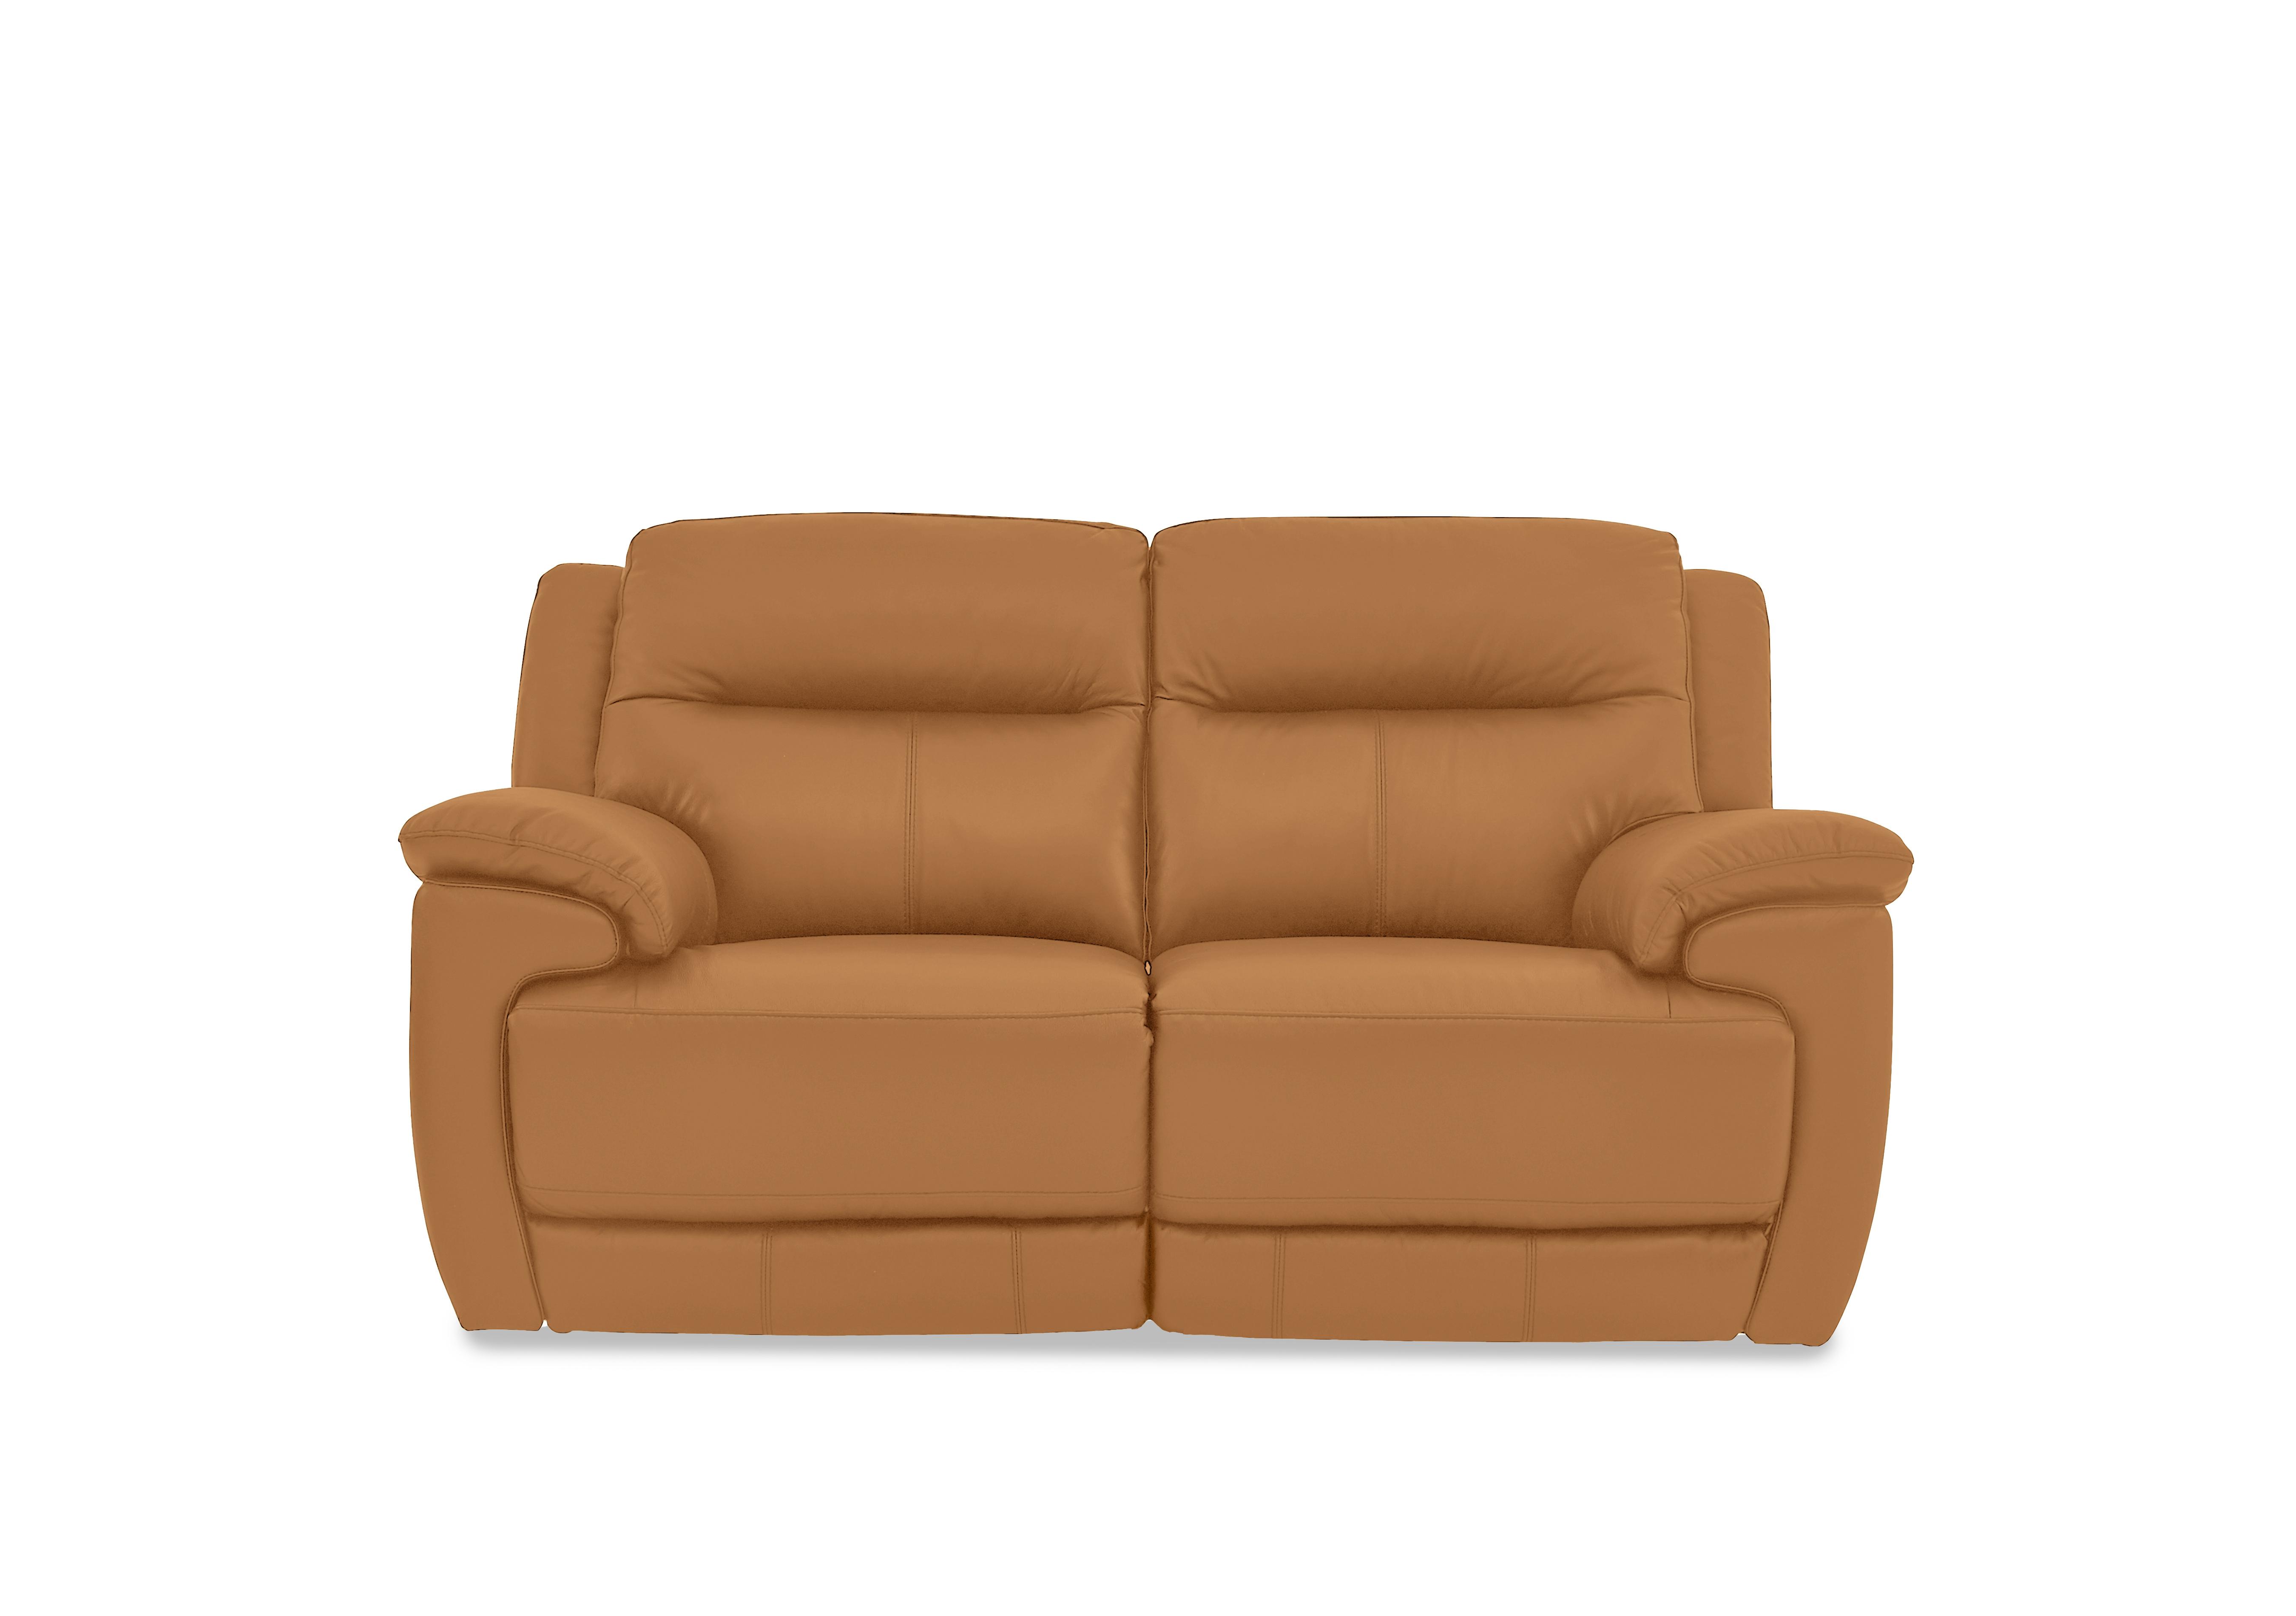 Touch 2 Seater Leather Sofa in Bv-335e Honey Yellow on Furniture Village